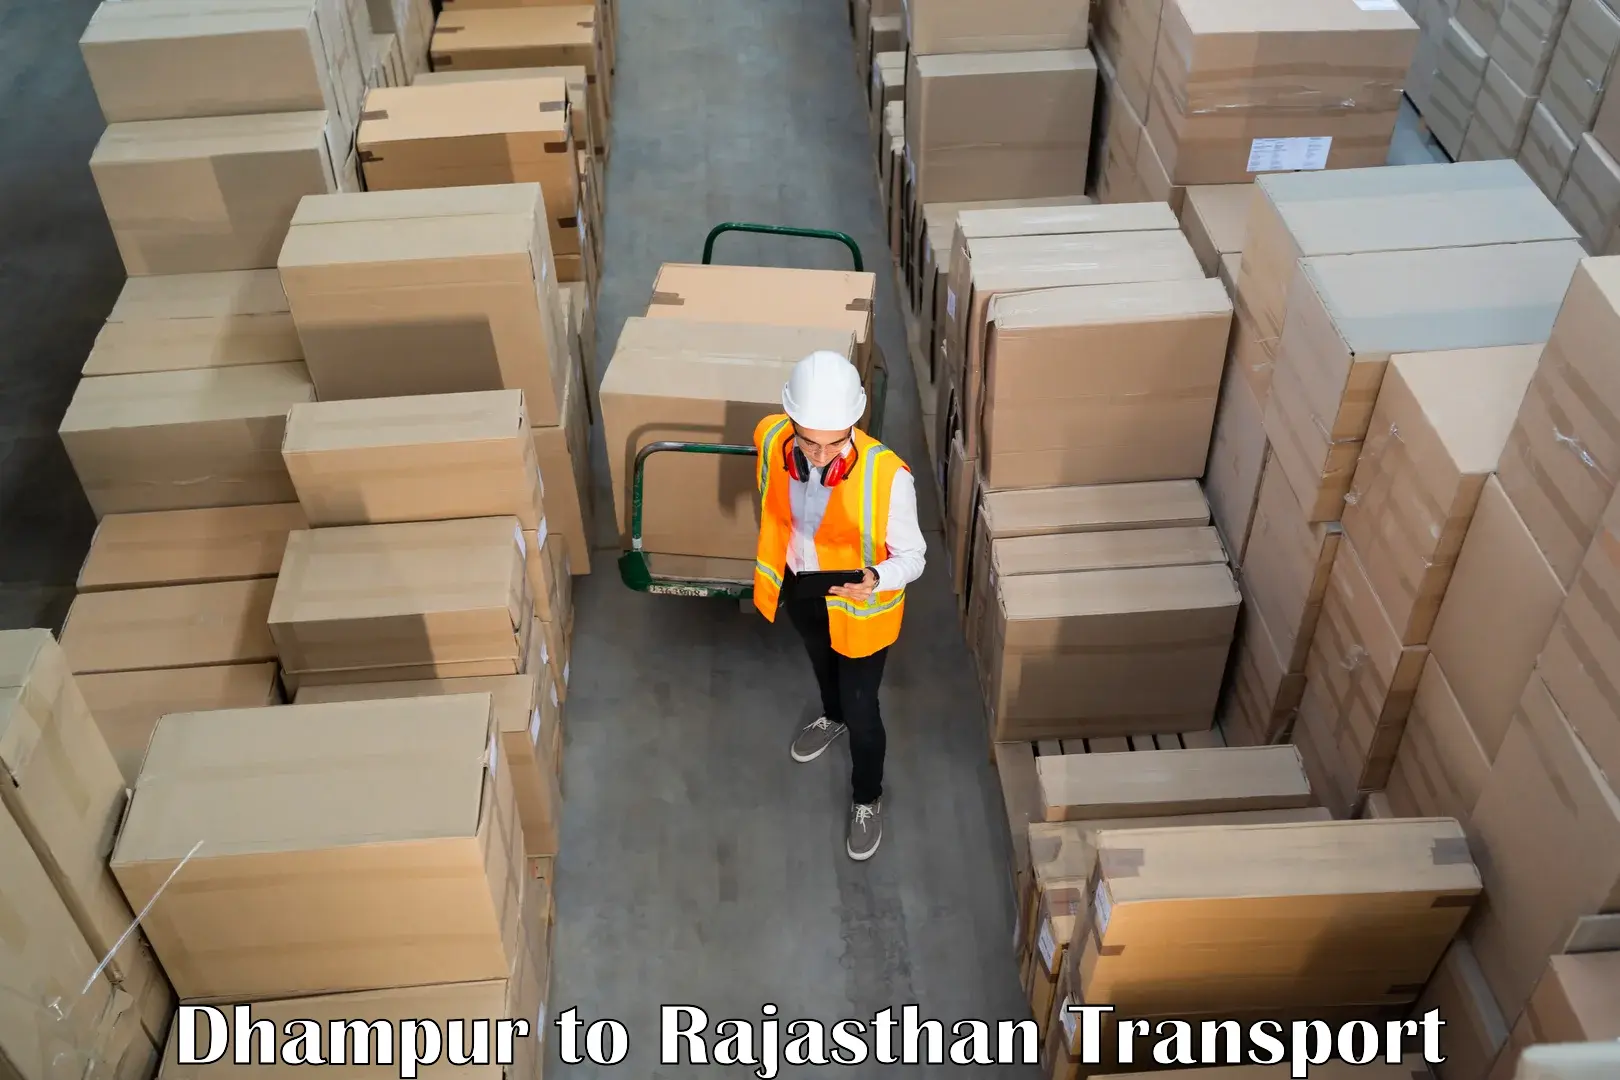 Goods delivery service Dhampur to Jhunjhunu